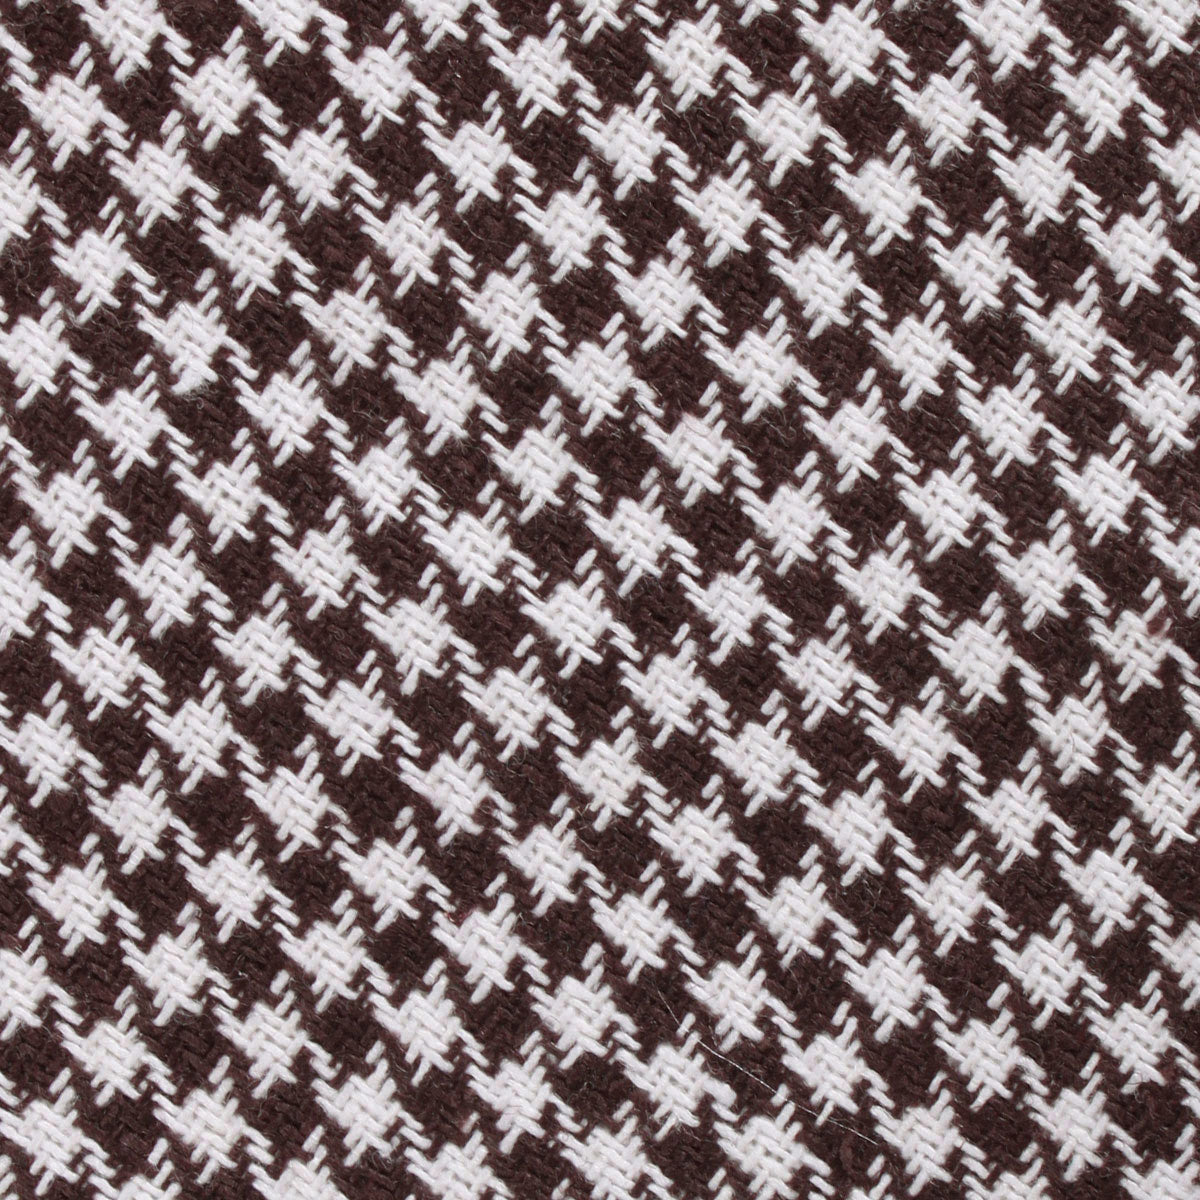 Cappuccino Houndstooth Brown Linen Fabric Kids Diamond Bow Tie